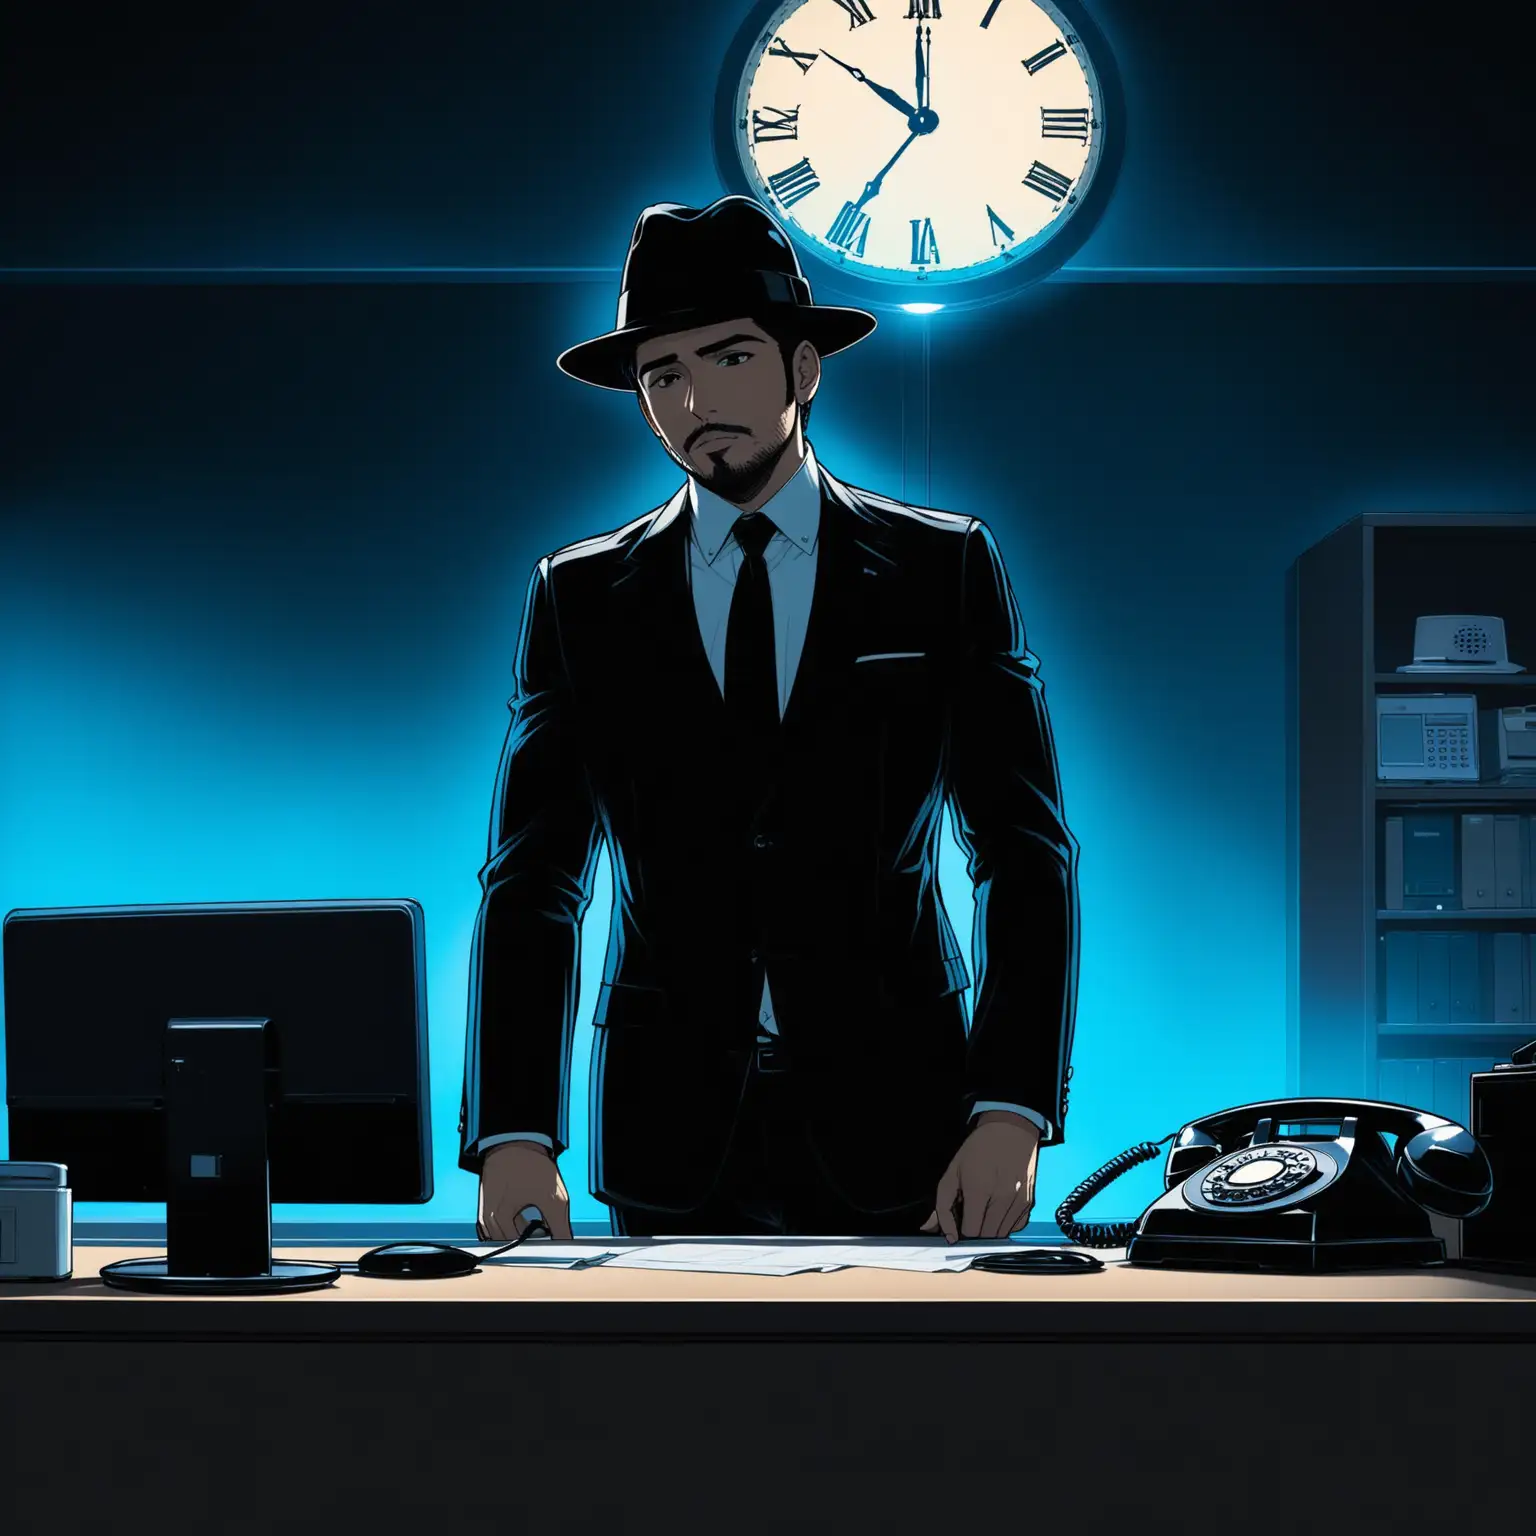 A medium shot. A Latino man in his 30’s stands behind his desk in a dark office lit with blue light. He wears a black suit and a black fedora hat. There is a clock on the wall behind him. There is a landline phone on the desk. 